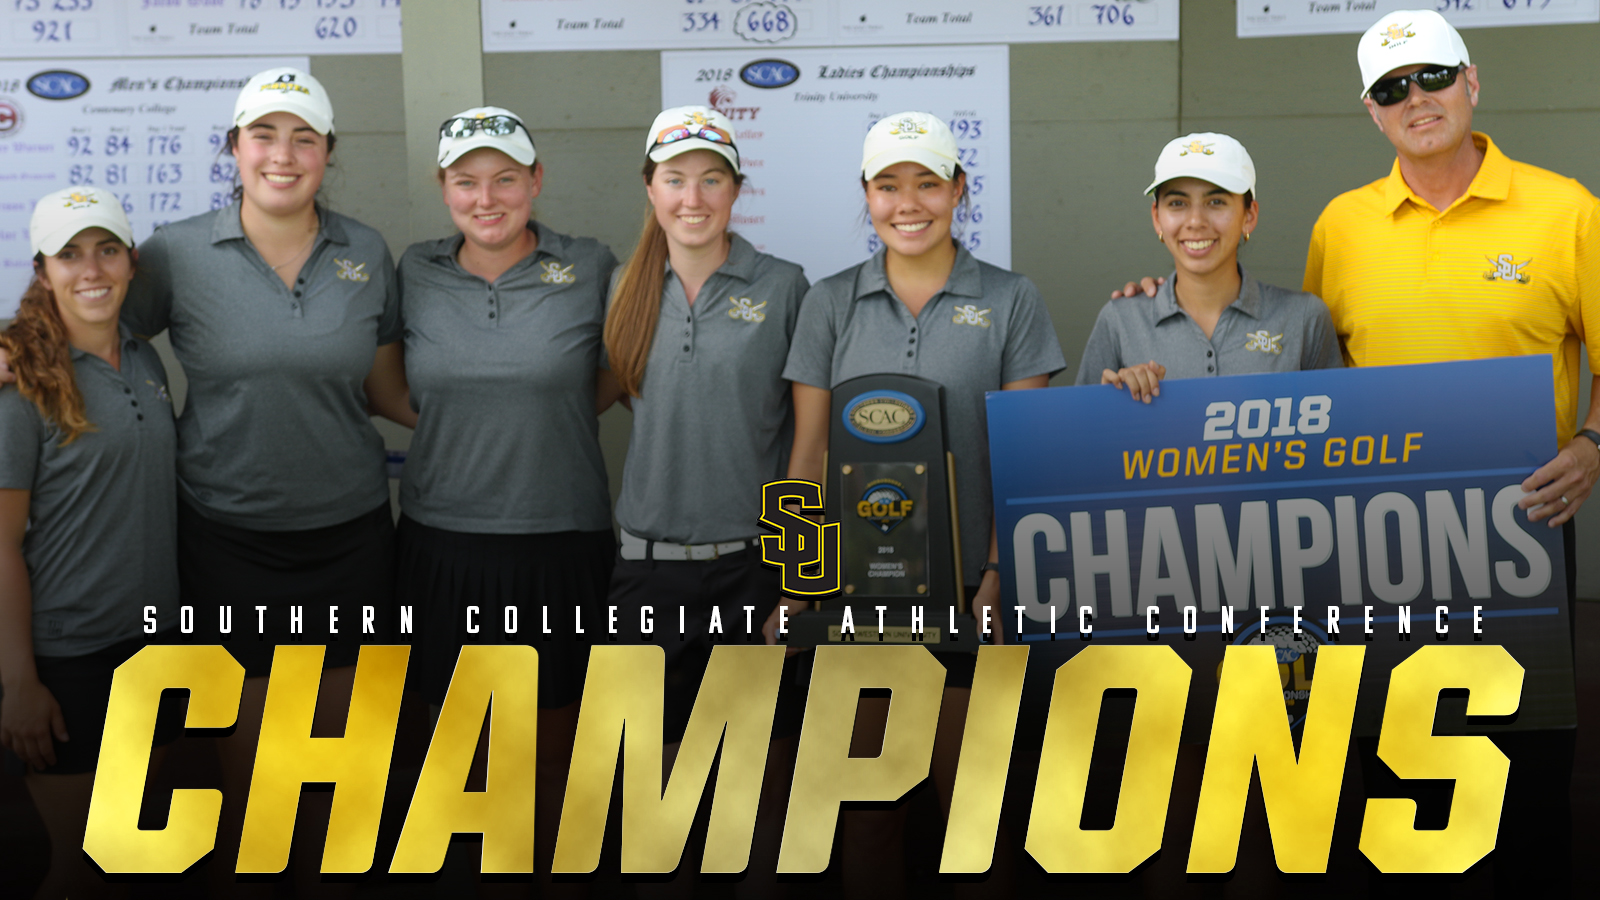 Southwestern women's golf back on top as SCAC Champions